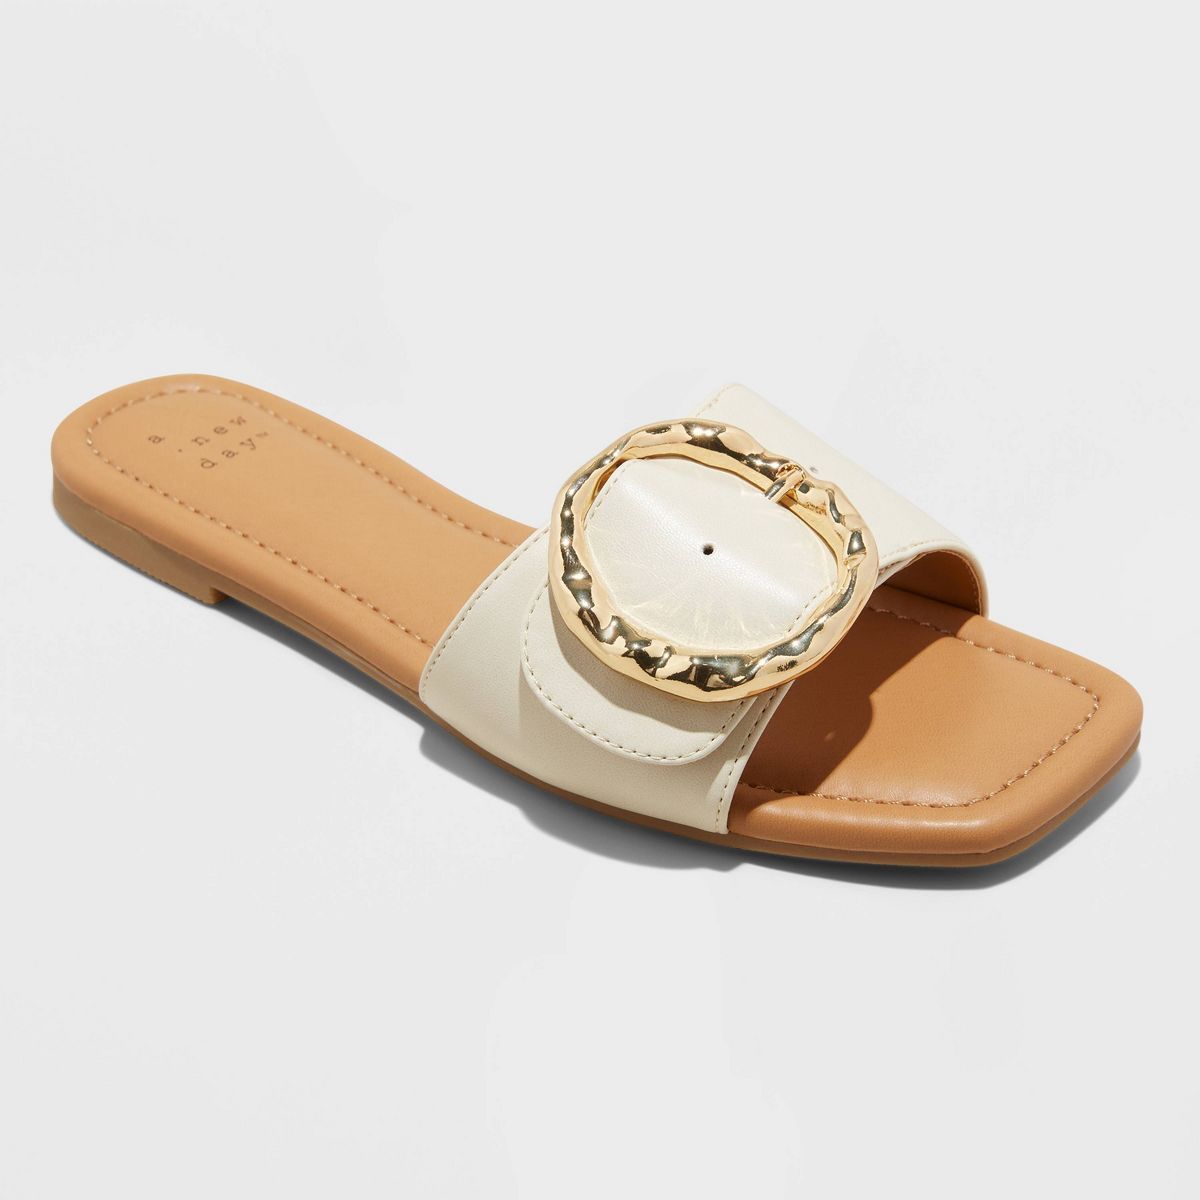 Women's Bennie Buckle Slide Sandals with Memory Foam Insole - A New Day™ Cream 8 | Target